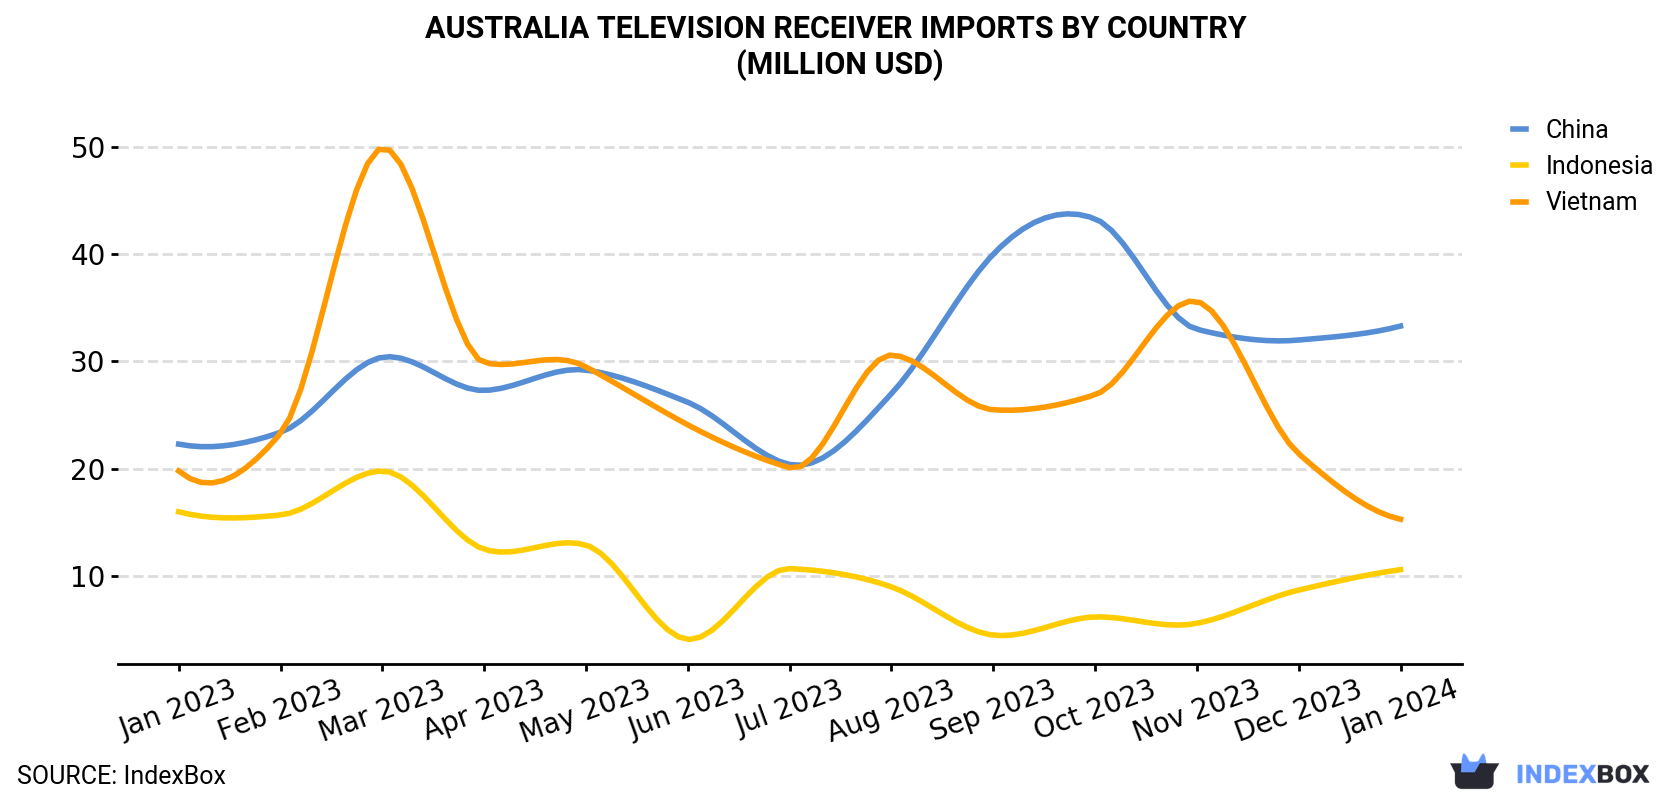 Australia Television Receiver Imports By Country (Million USD)